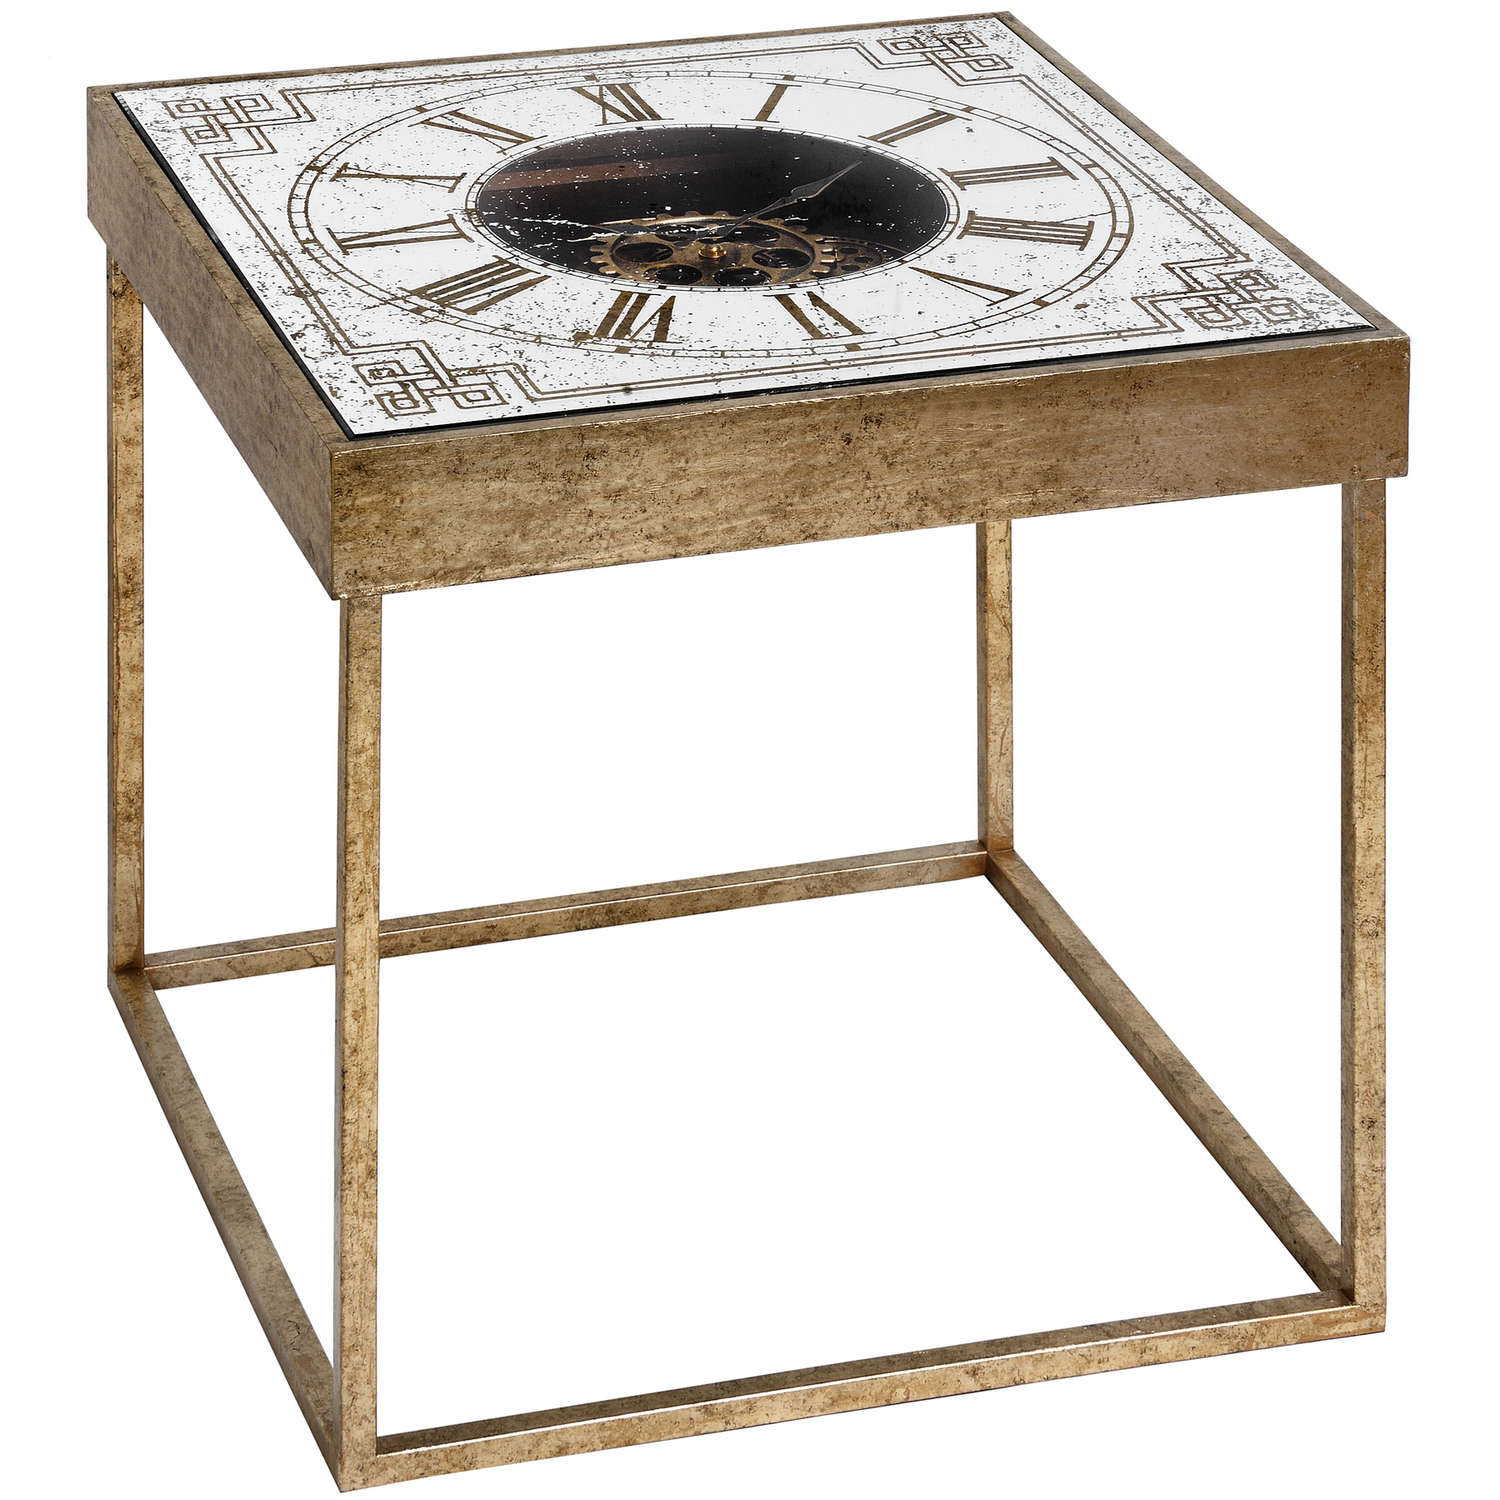 Mirrored Square Framed Clock Table With Moving Mechanism - Image 1